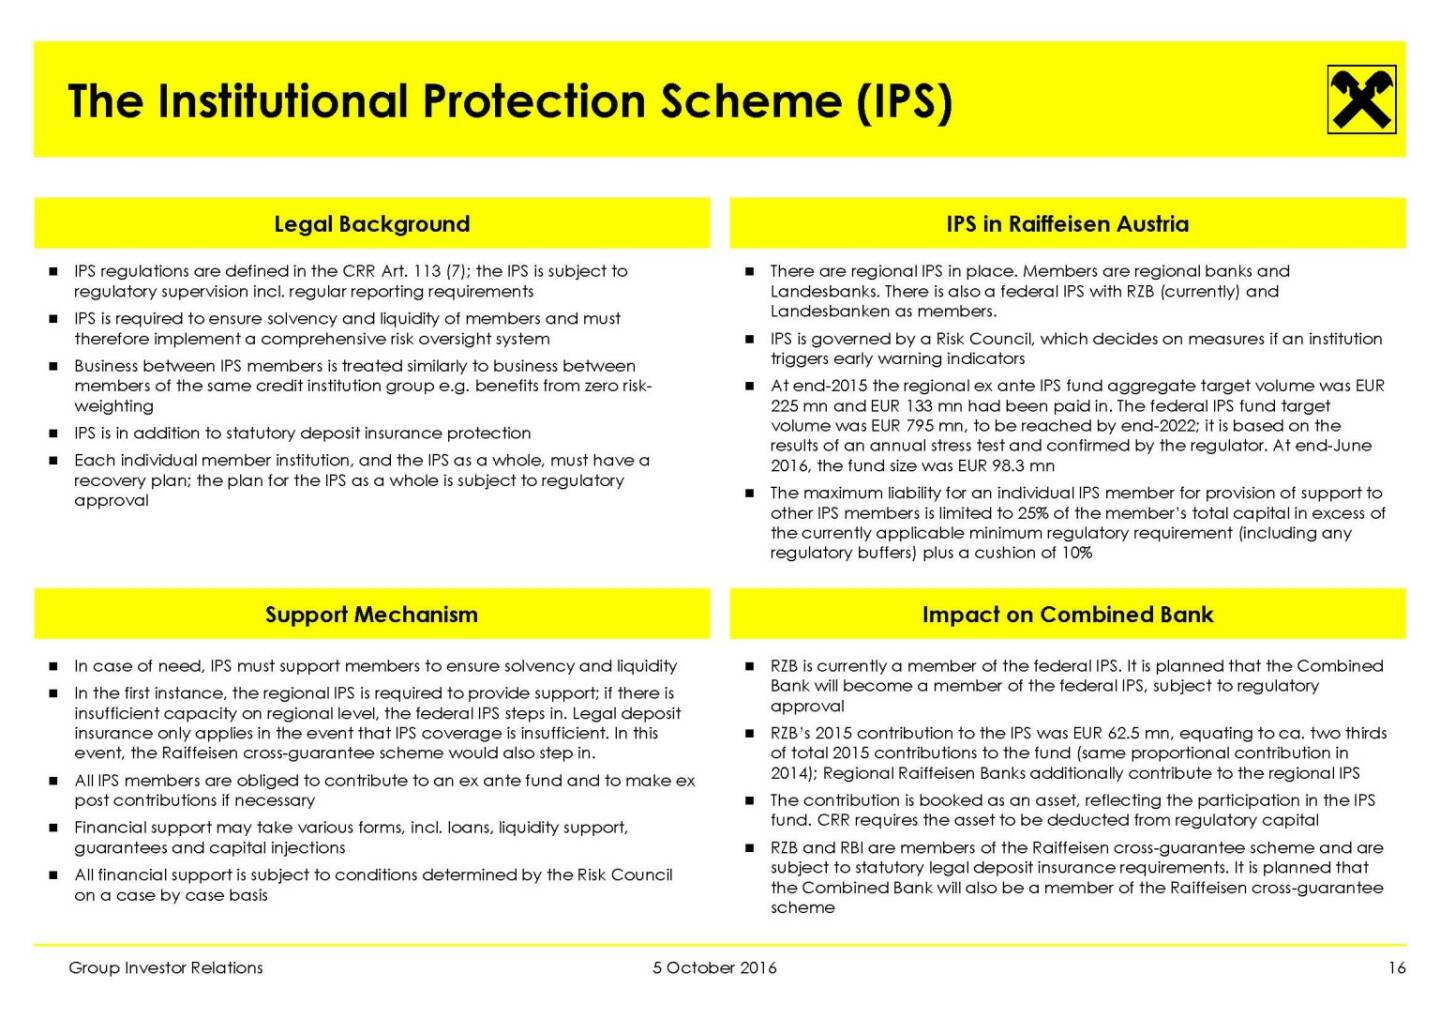 RBI - The Institutional Protection Scheme (IPS)